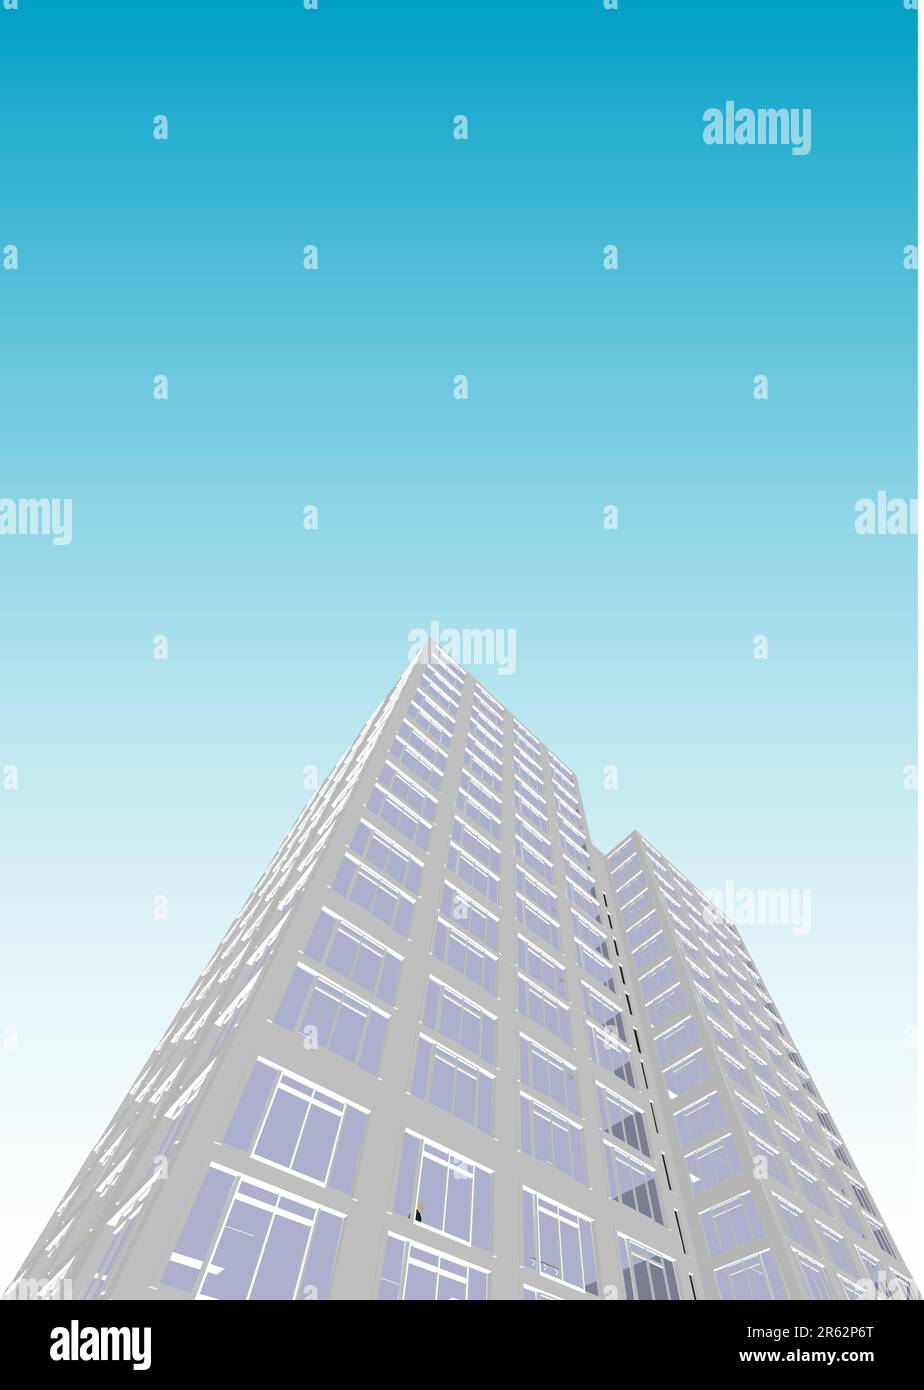 Skyscraper / Office Block in vector format. Every feature of each building including doors and windows can be edited or colored to suit. Stock Vector